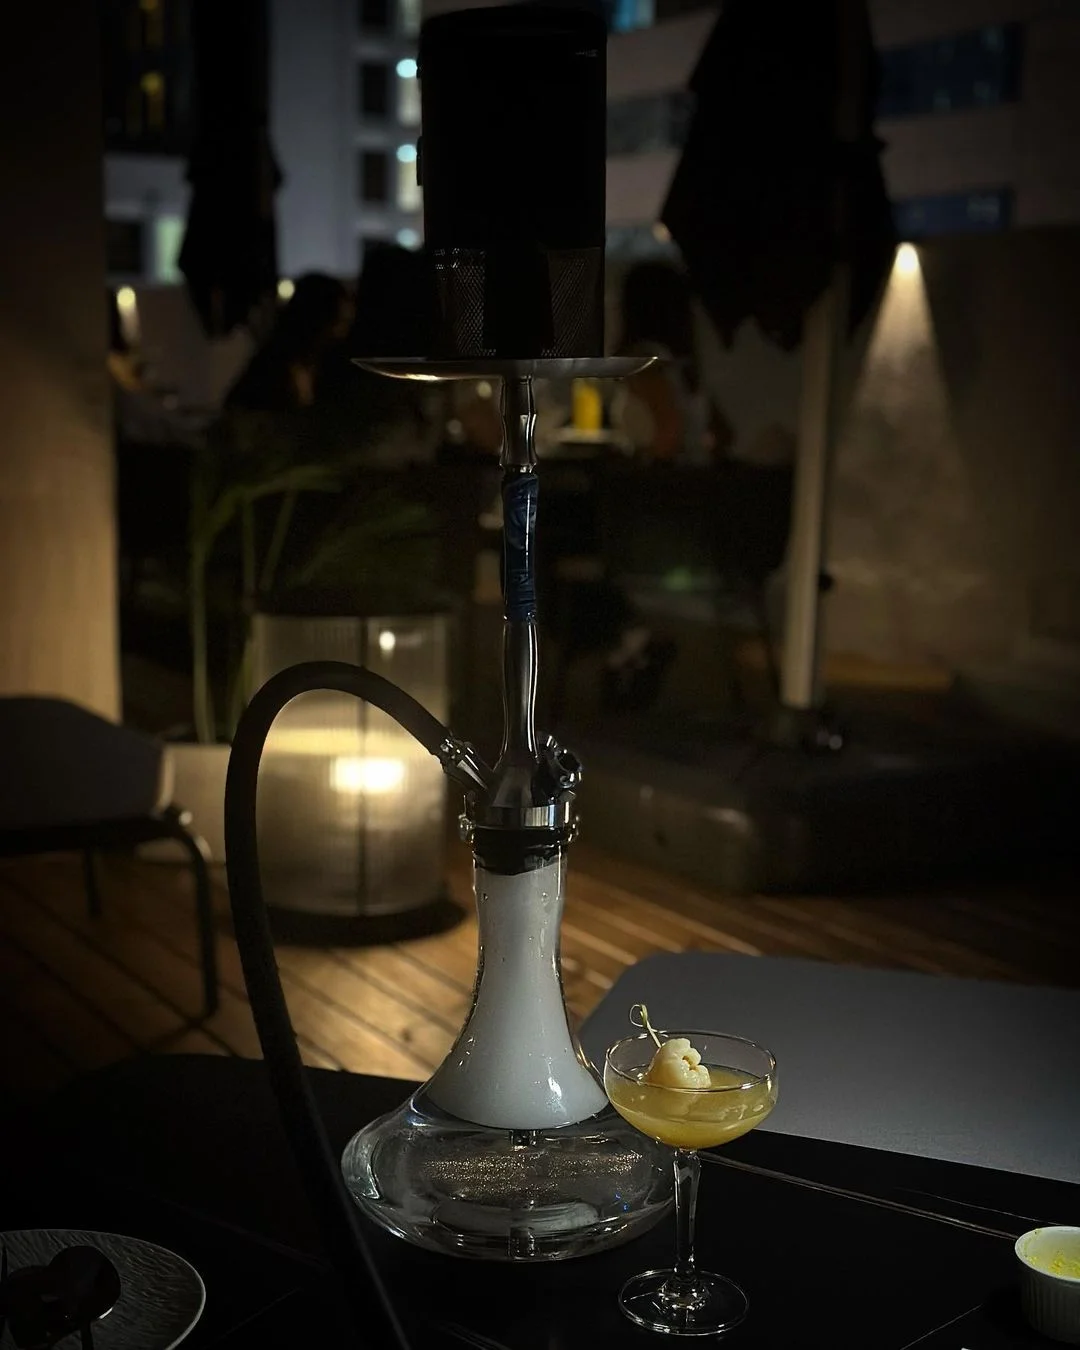 How To Make A Home Made Hookah: Tips For Making The Perfect Hookah